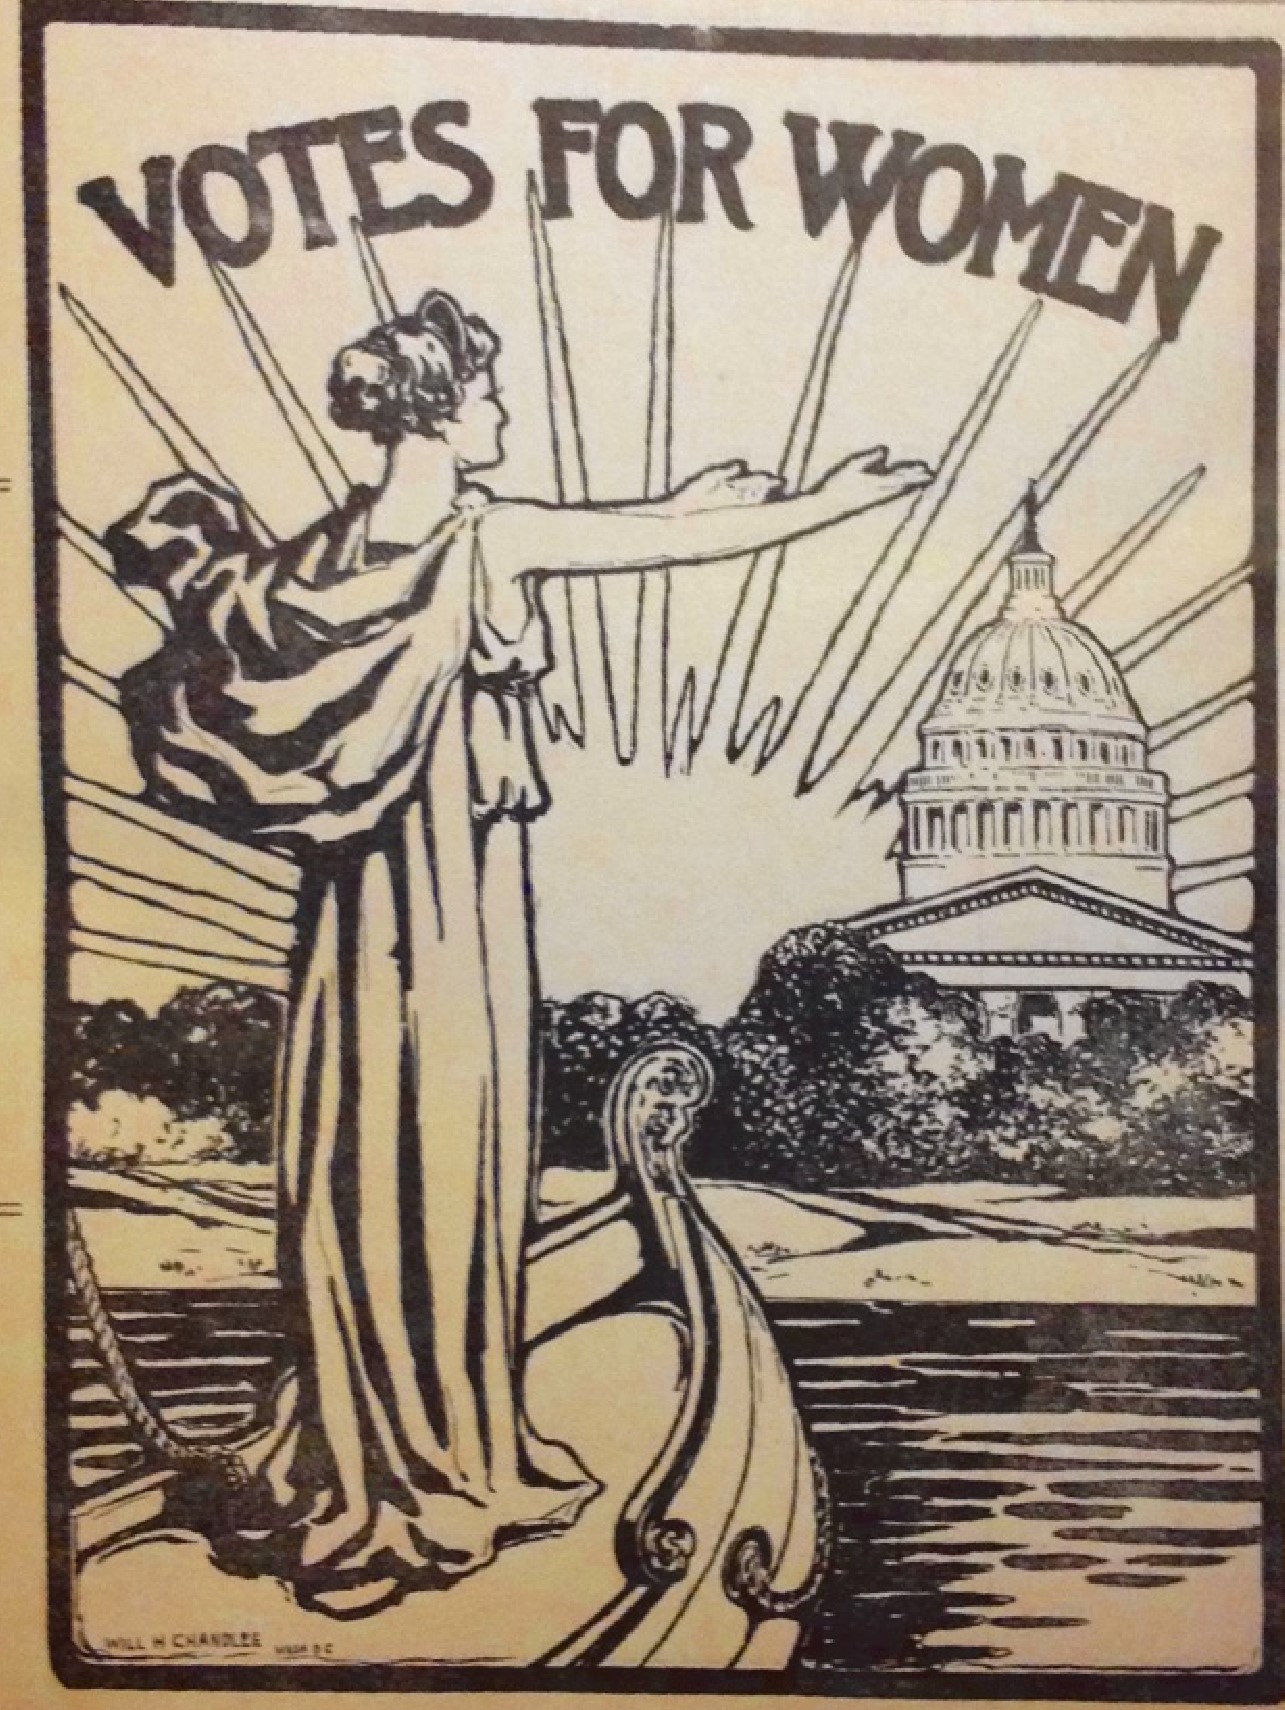 The Art of Suffrage Cartoons Reflect America’s Struggle for Equal